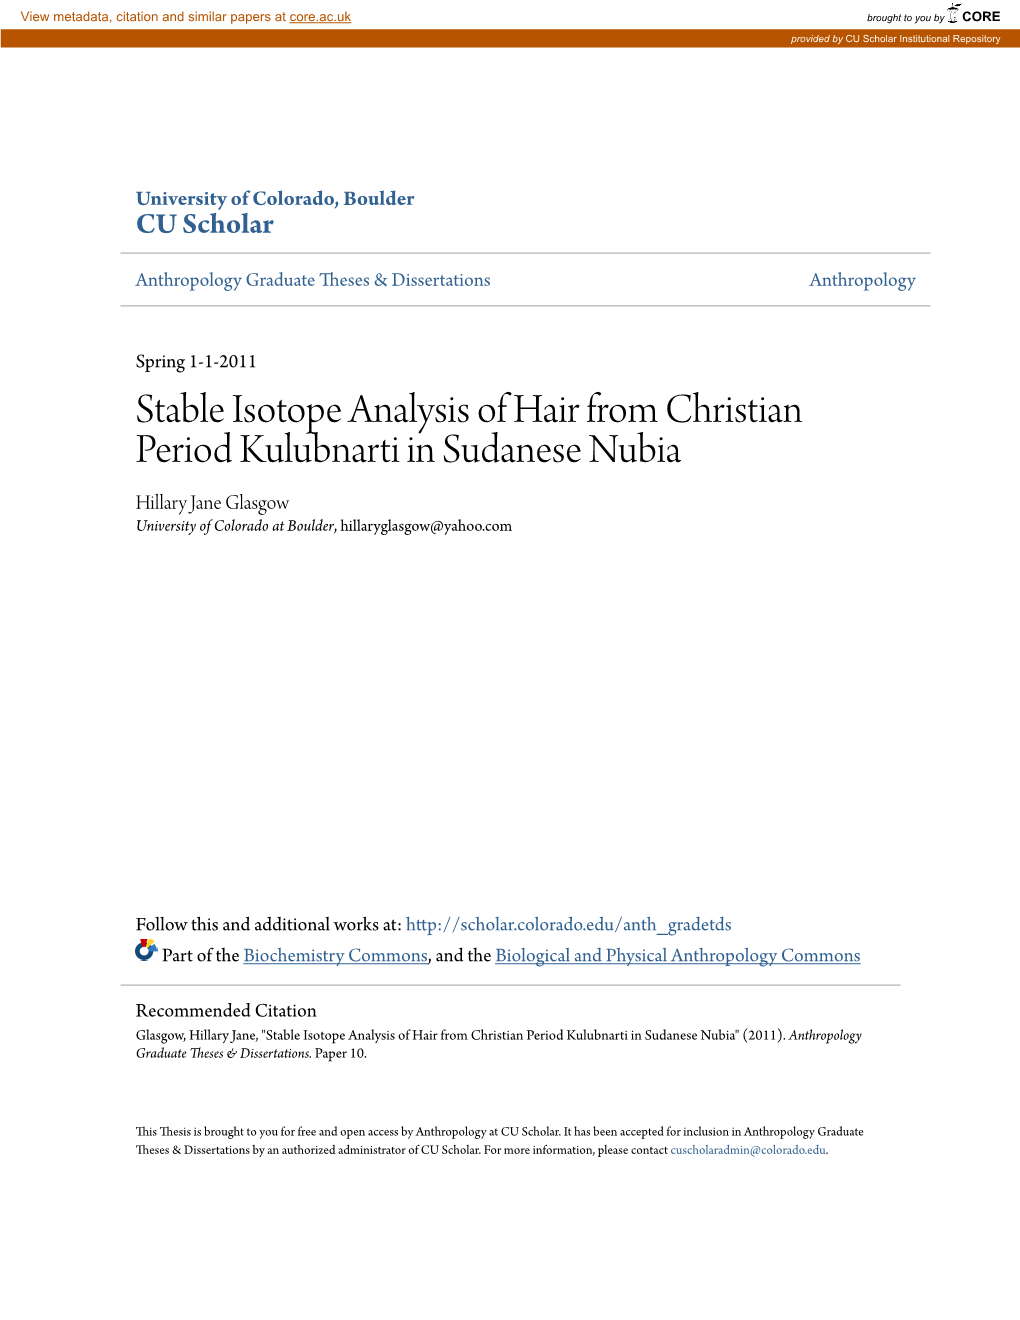 Stable Isotope Analysis of Hair from Christian Period Kulubnarti in Sudanese Nubia Hillary Jane Glasgow University of Colorado at Boulder, Hillaryglasgow@Yahoo.Com